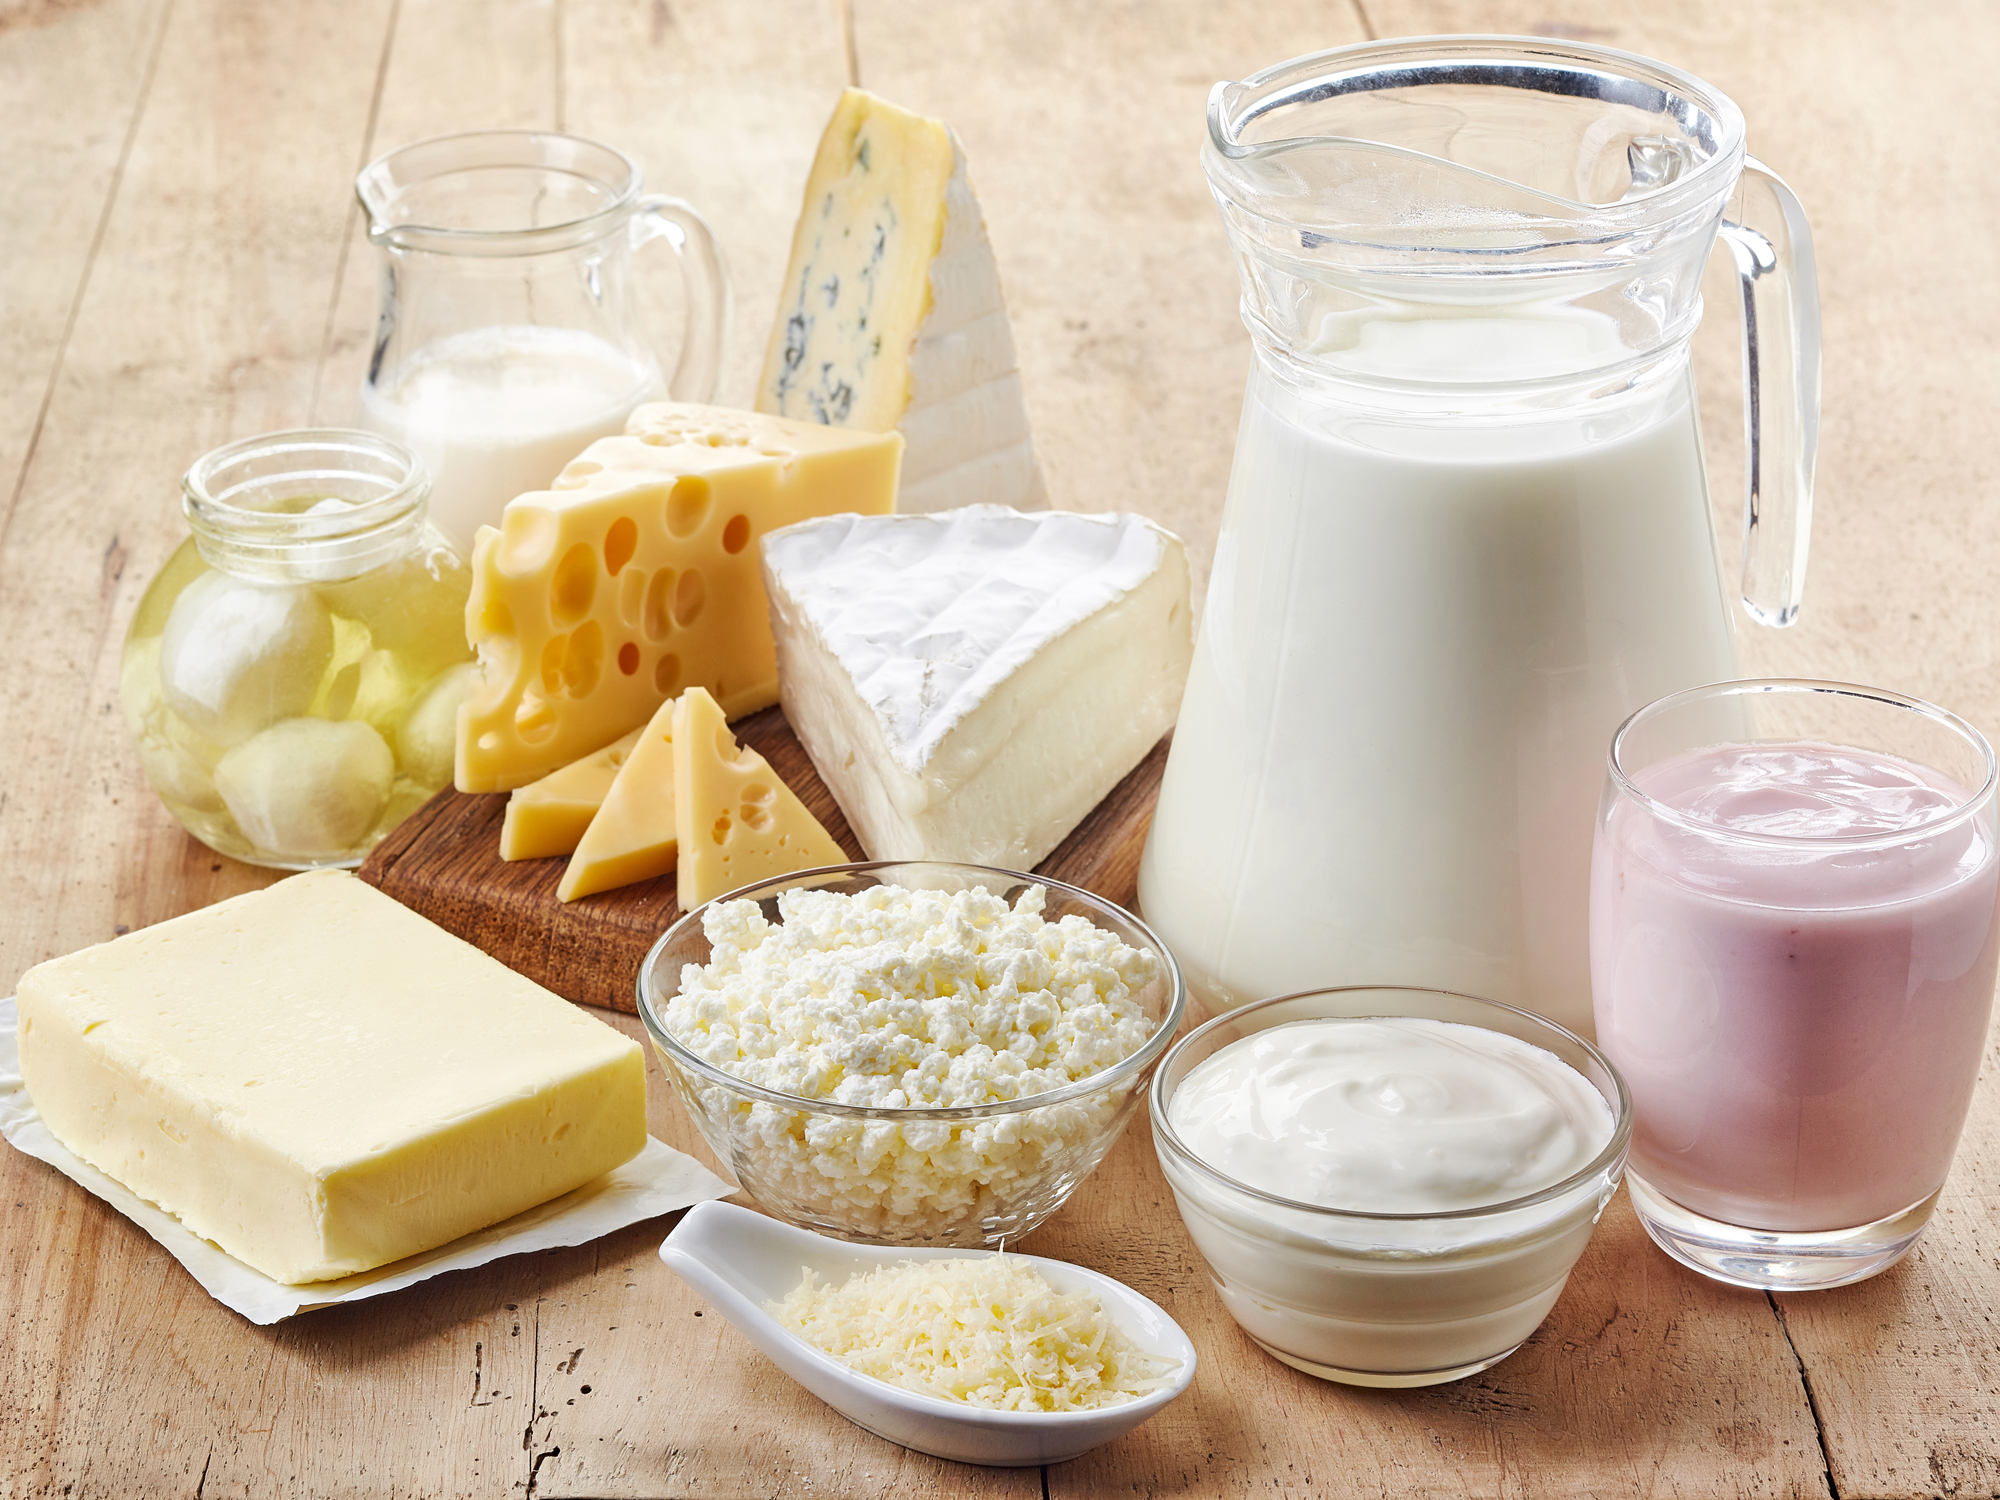 The dairy that drops diabetes risk 70%